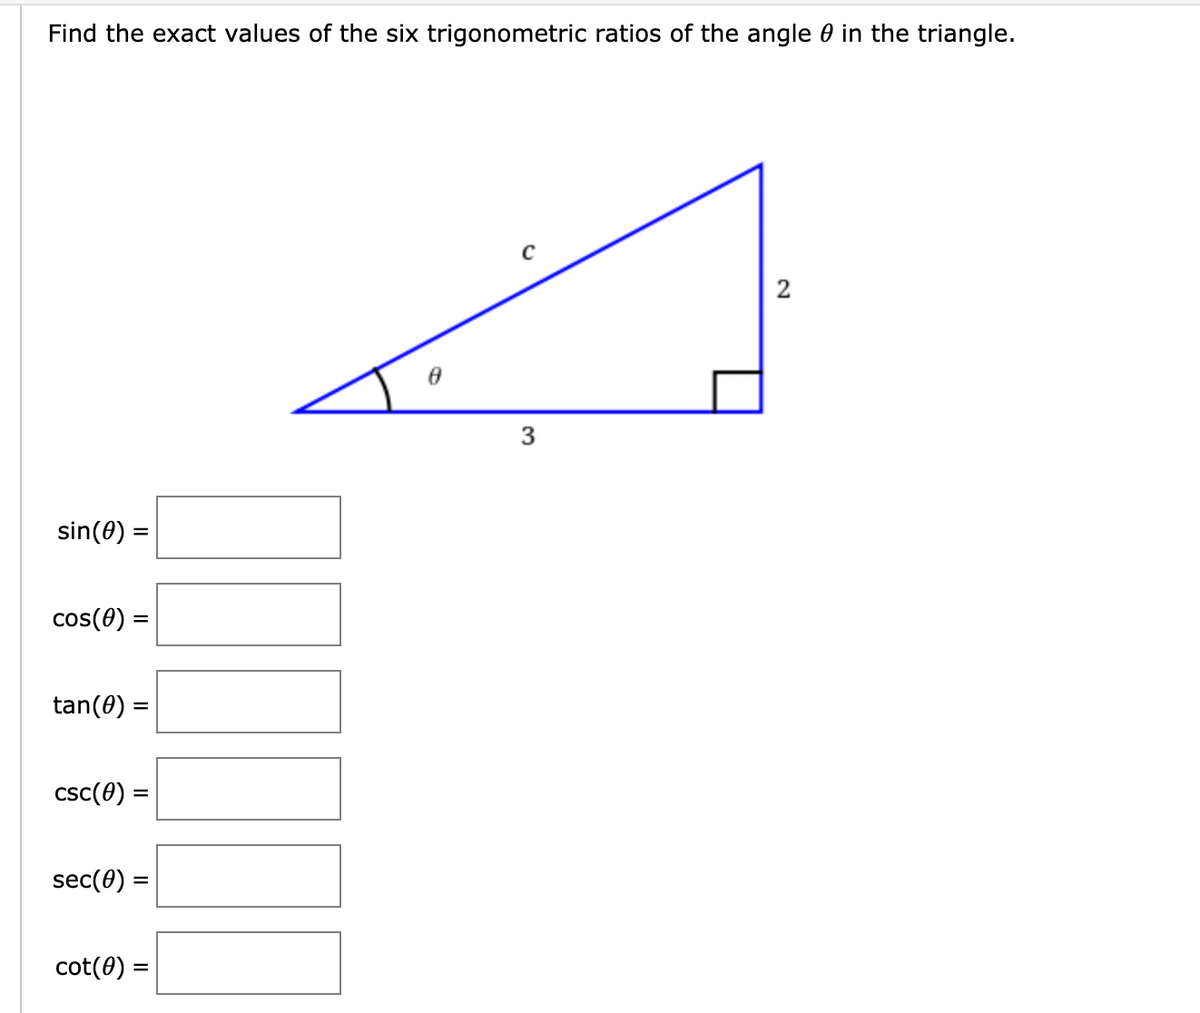 Find the exact values of the six trigonometric ratios of the angle 0 in the triangle.
2
3
sin(0) =
cos(0) =
tan(0) =
csc(0) =
sec(0) =
cot(0) =
